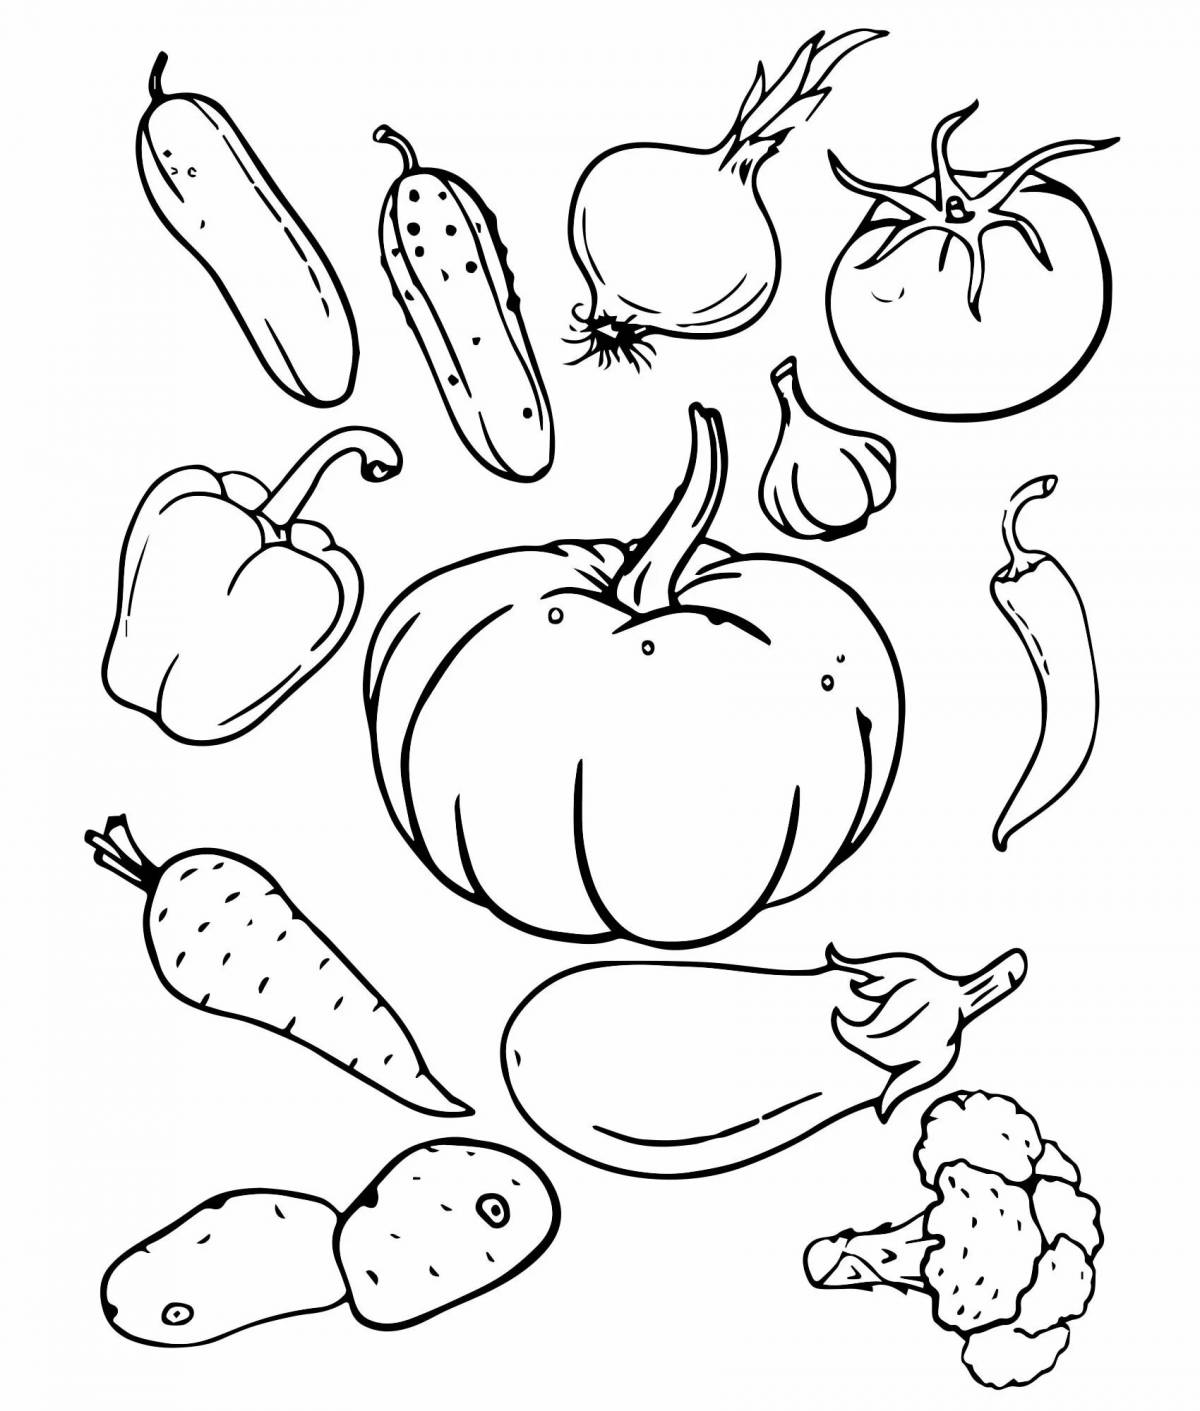 Irresistible fruit and vegetable coloring book for girls